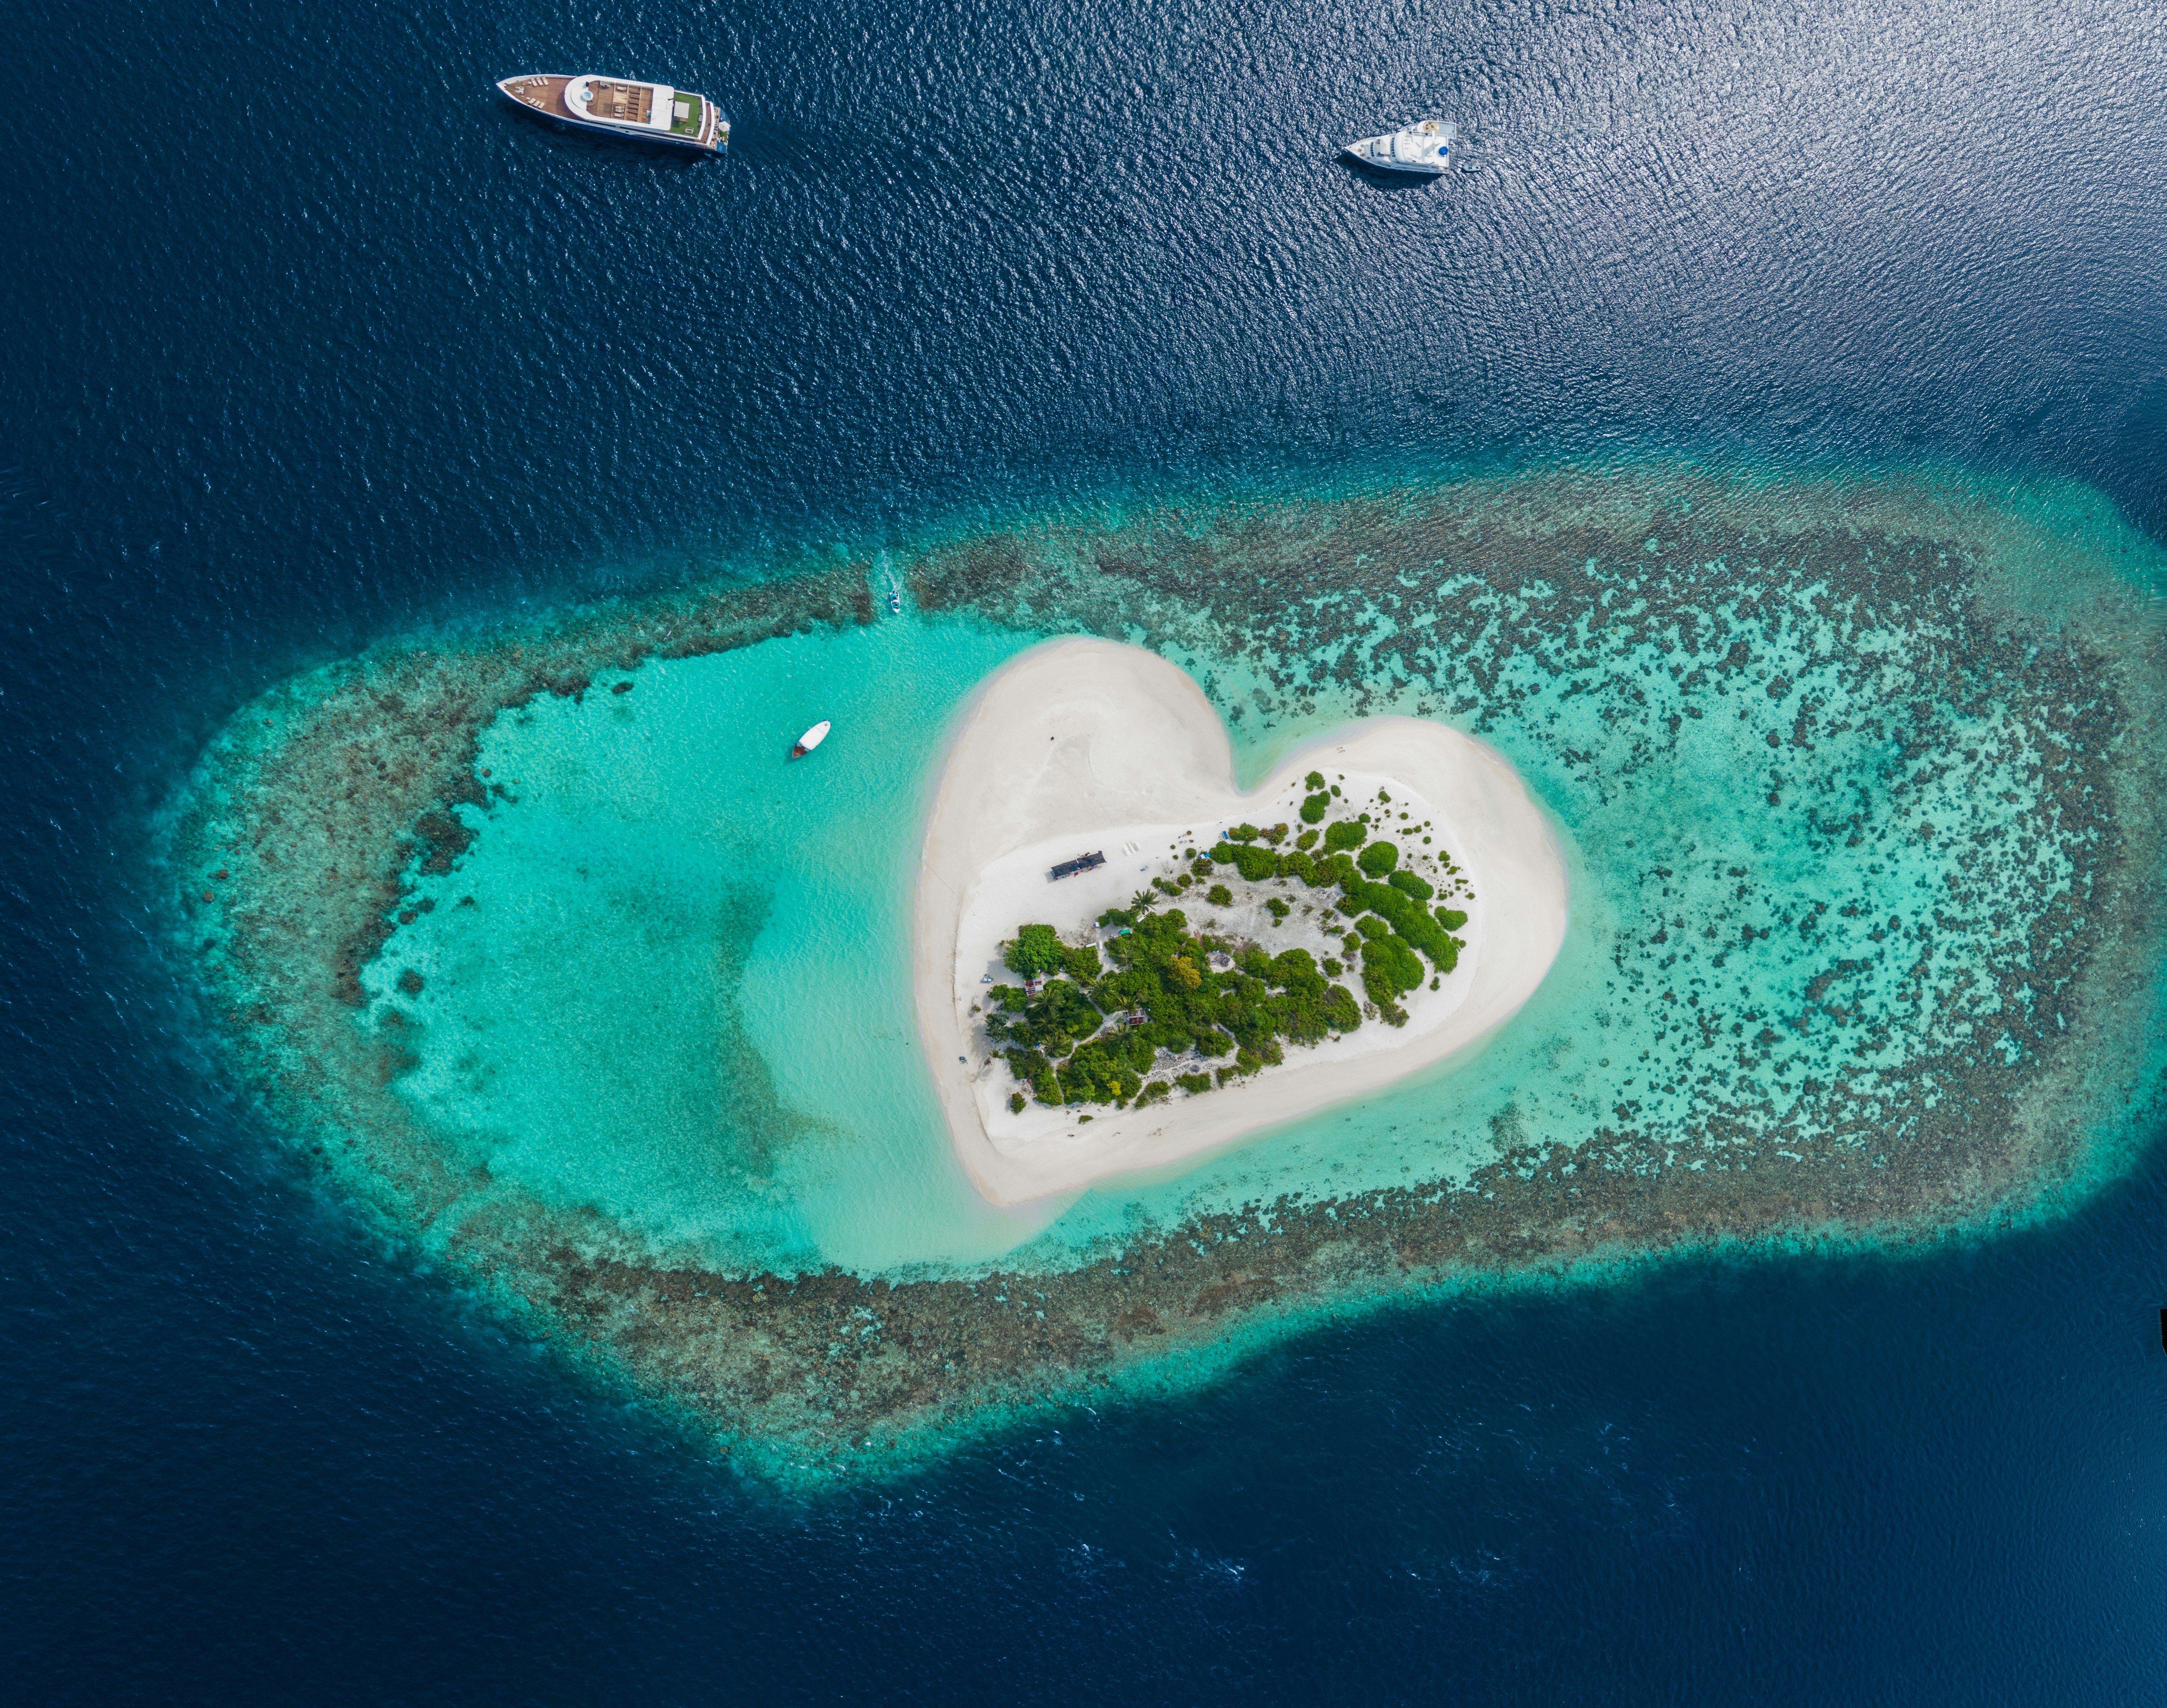 The Maldives is ideal for sailing all year round. But it is definitely worth following the forecast and recommendations.